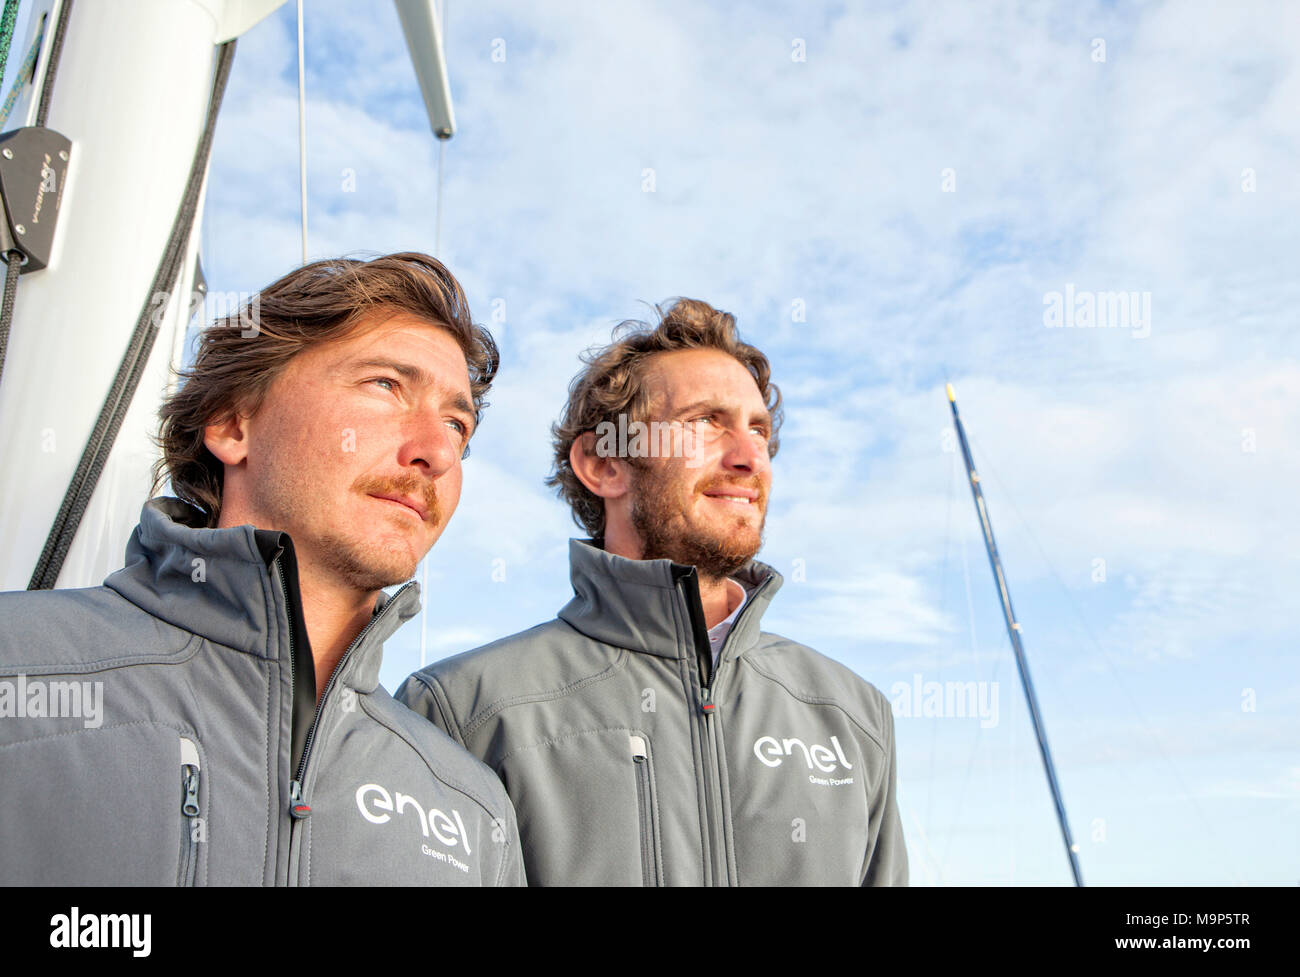 Portrait of two men standing on boat, Lorient, Brittany, France Stock Photo